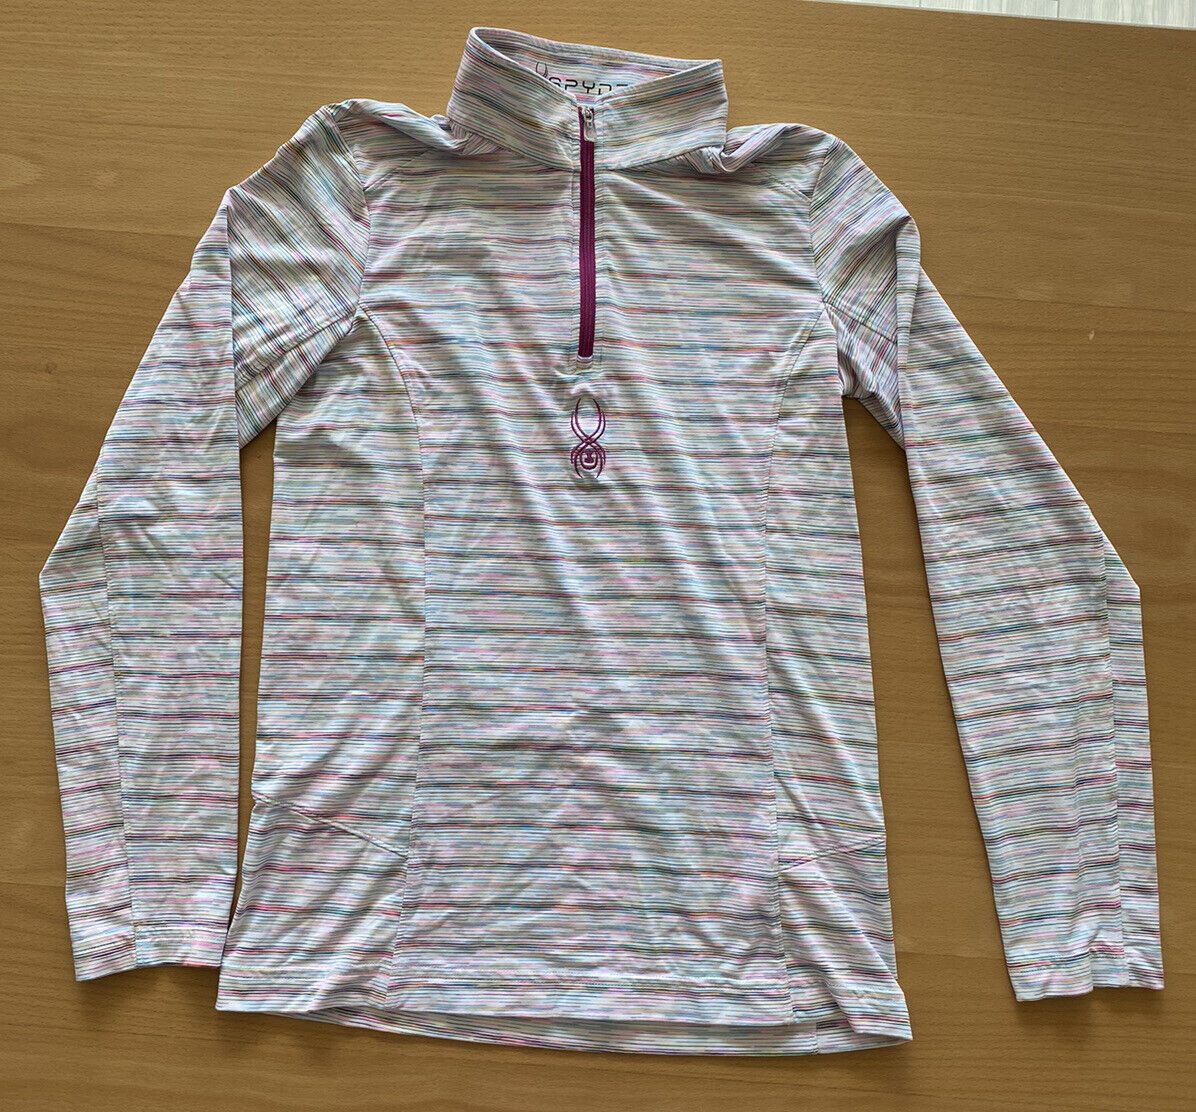 (2015) Spyder White/Multicolor Striped Jacket Work Out Active Pullover - Size L